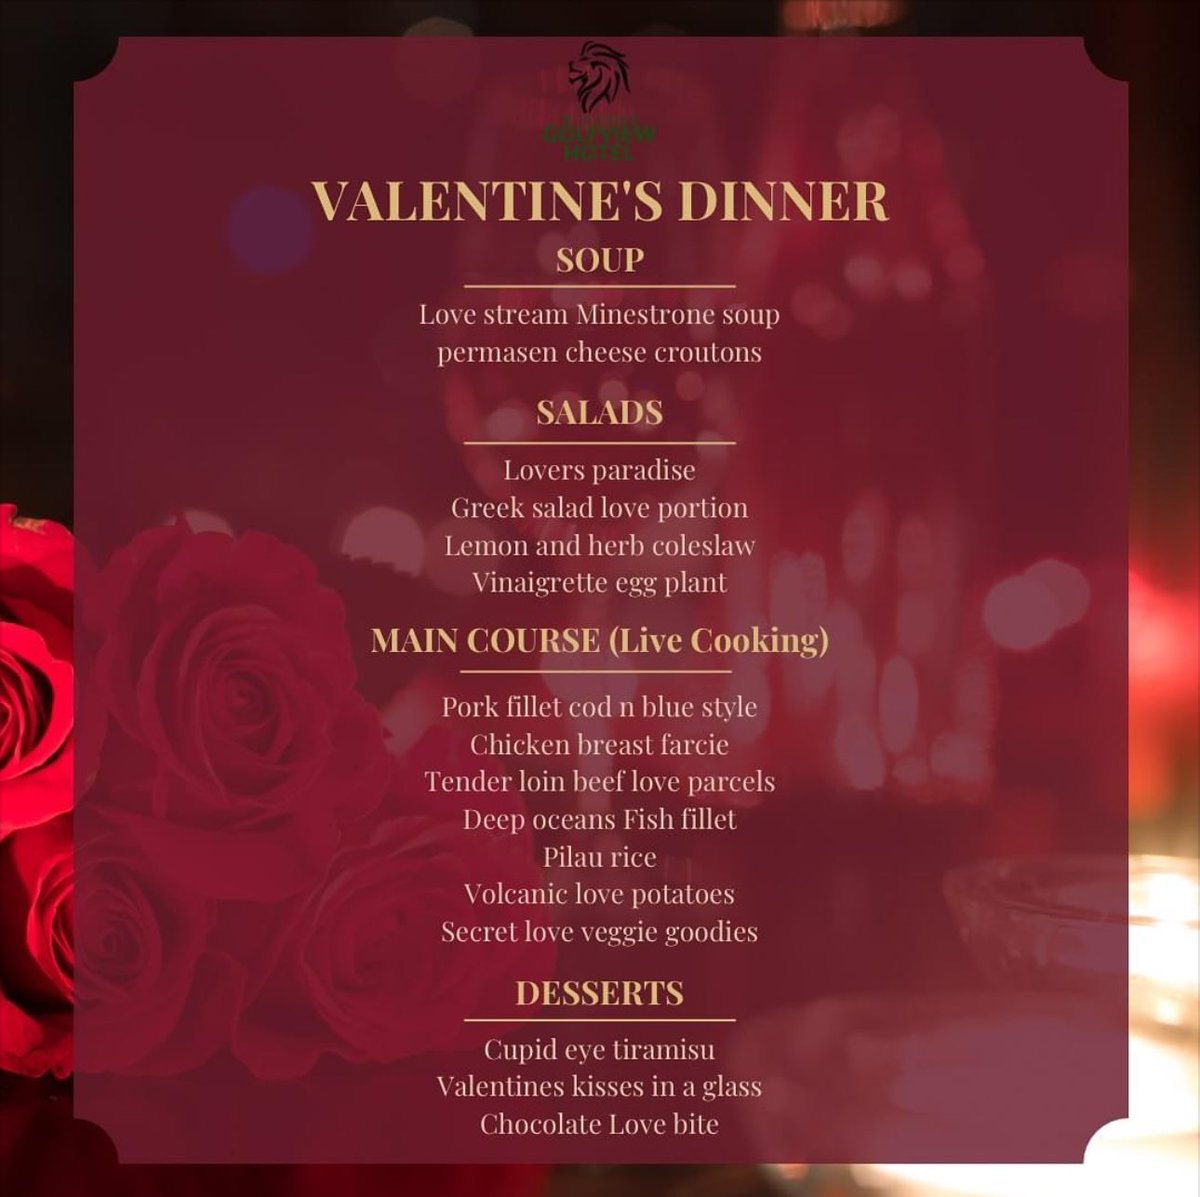 It’s the Month of love ❤️ See our Valentines special Menu and enjoy all the flavors of love M’kango Golfview Hotel has to offer this valentines day❤️ We are located at Plot 10247, Great East Road. Munali. Lusaka, Zambia. Call us on+260979727715 email: res@golfview-hotels.com